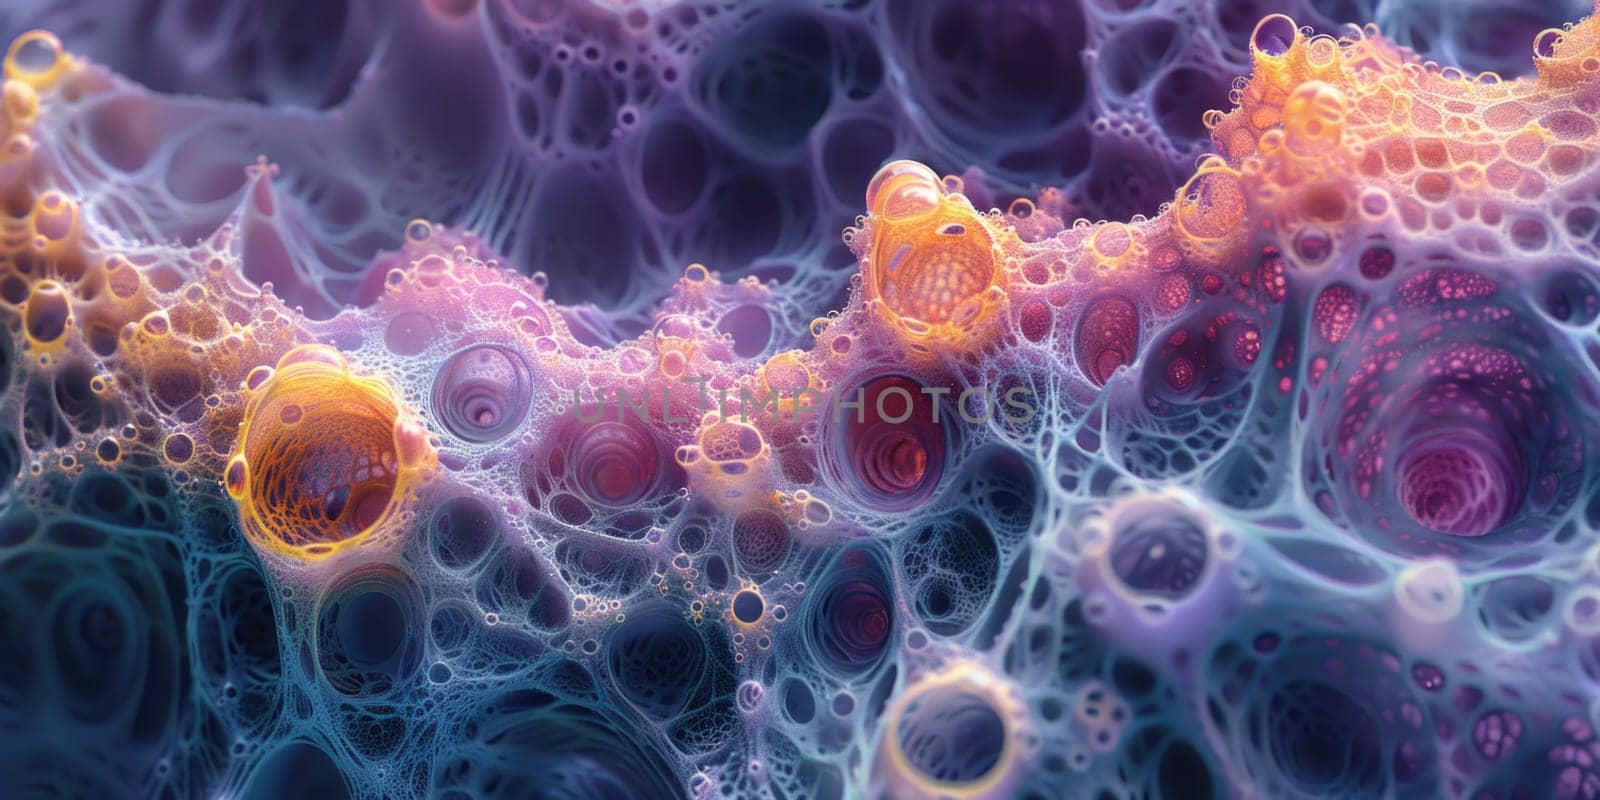 Detailed view of a vibrant and bubbly substance captured up close.